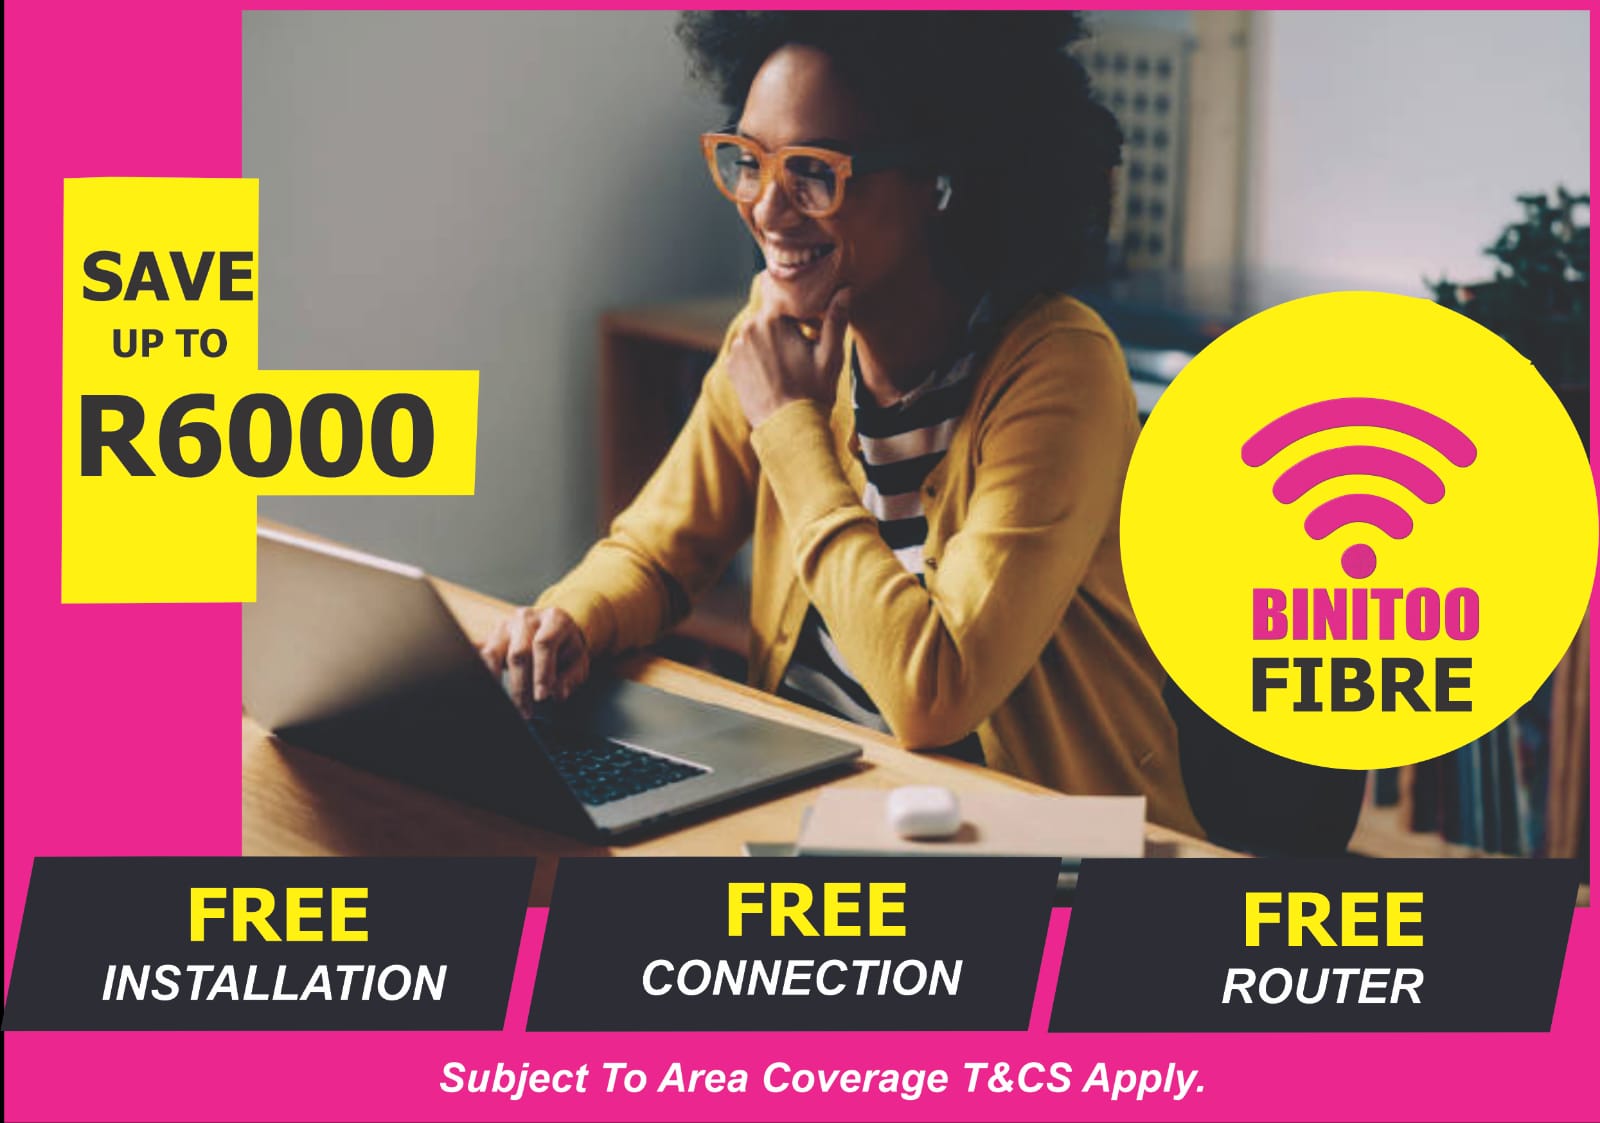 GET FIBRE FROM R320 PM